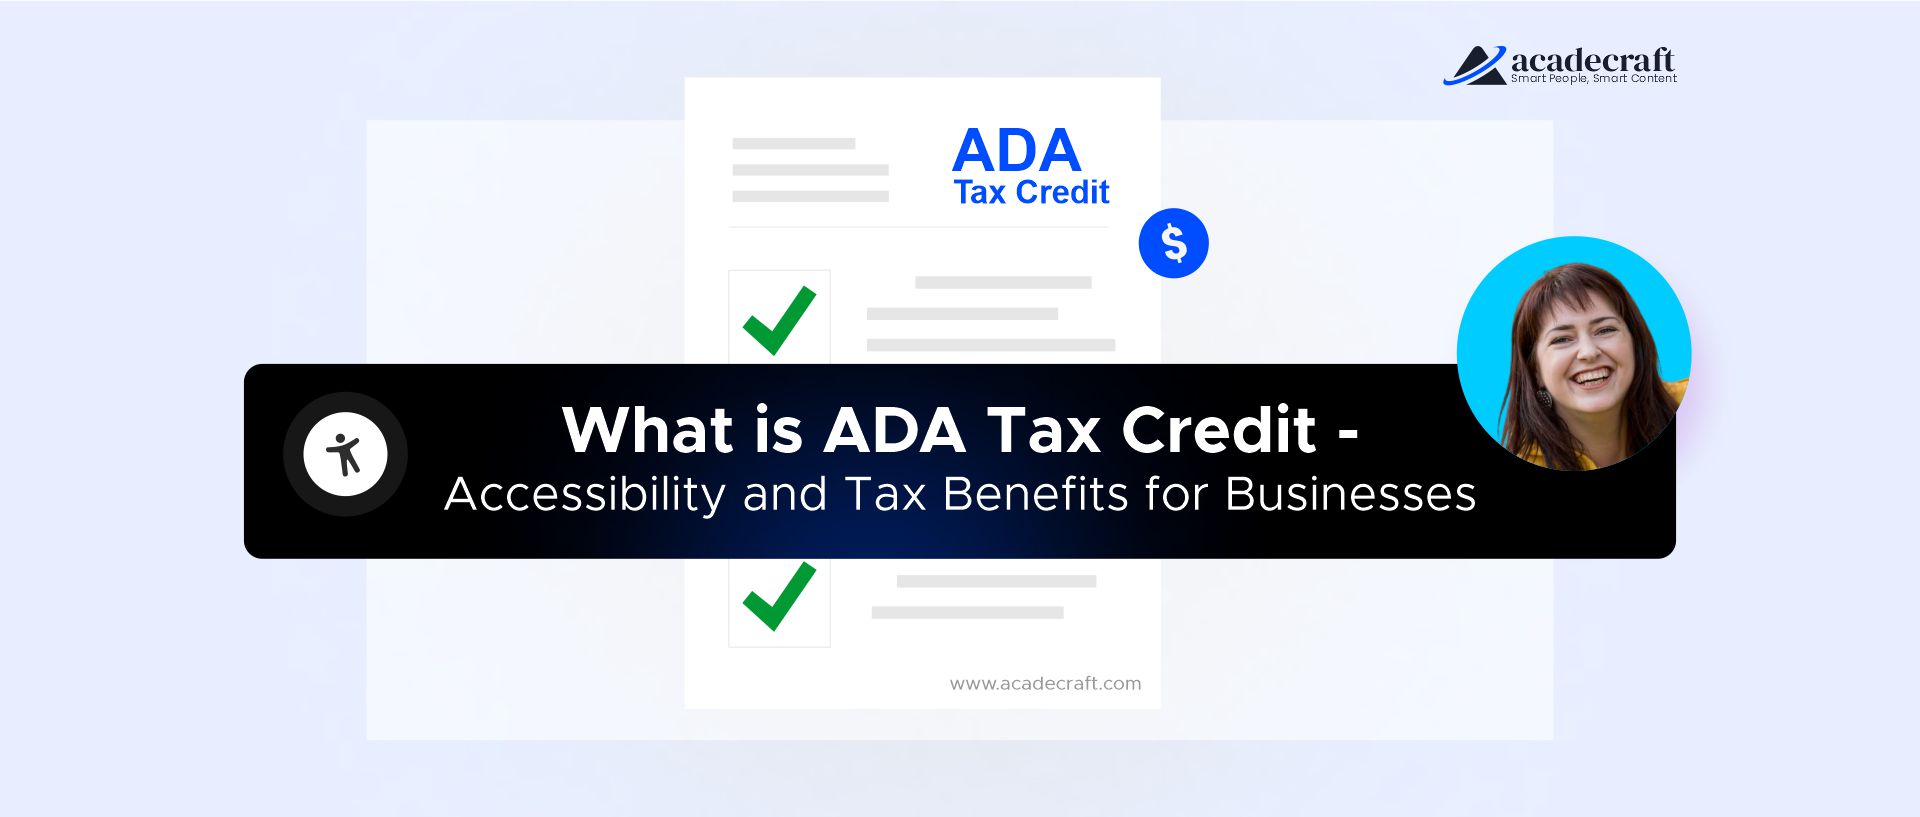 What is ADA Tax Credit - Accessibility and Tax Benefits for Businesses